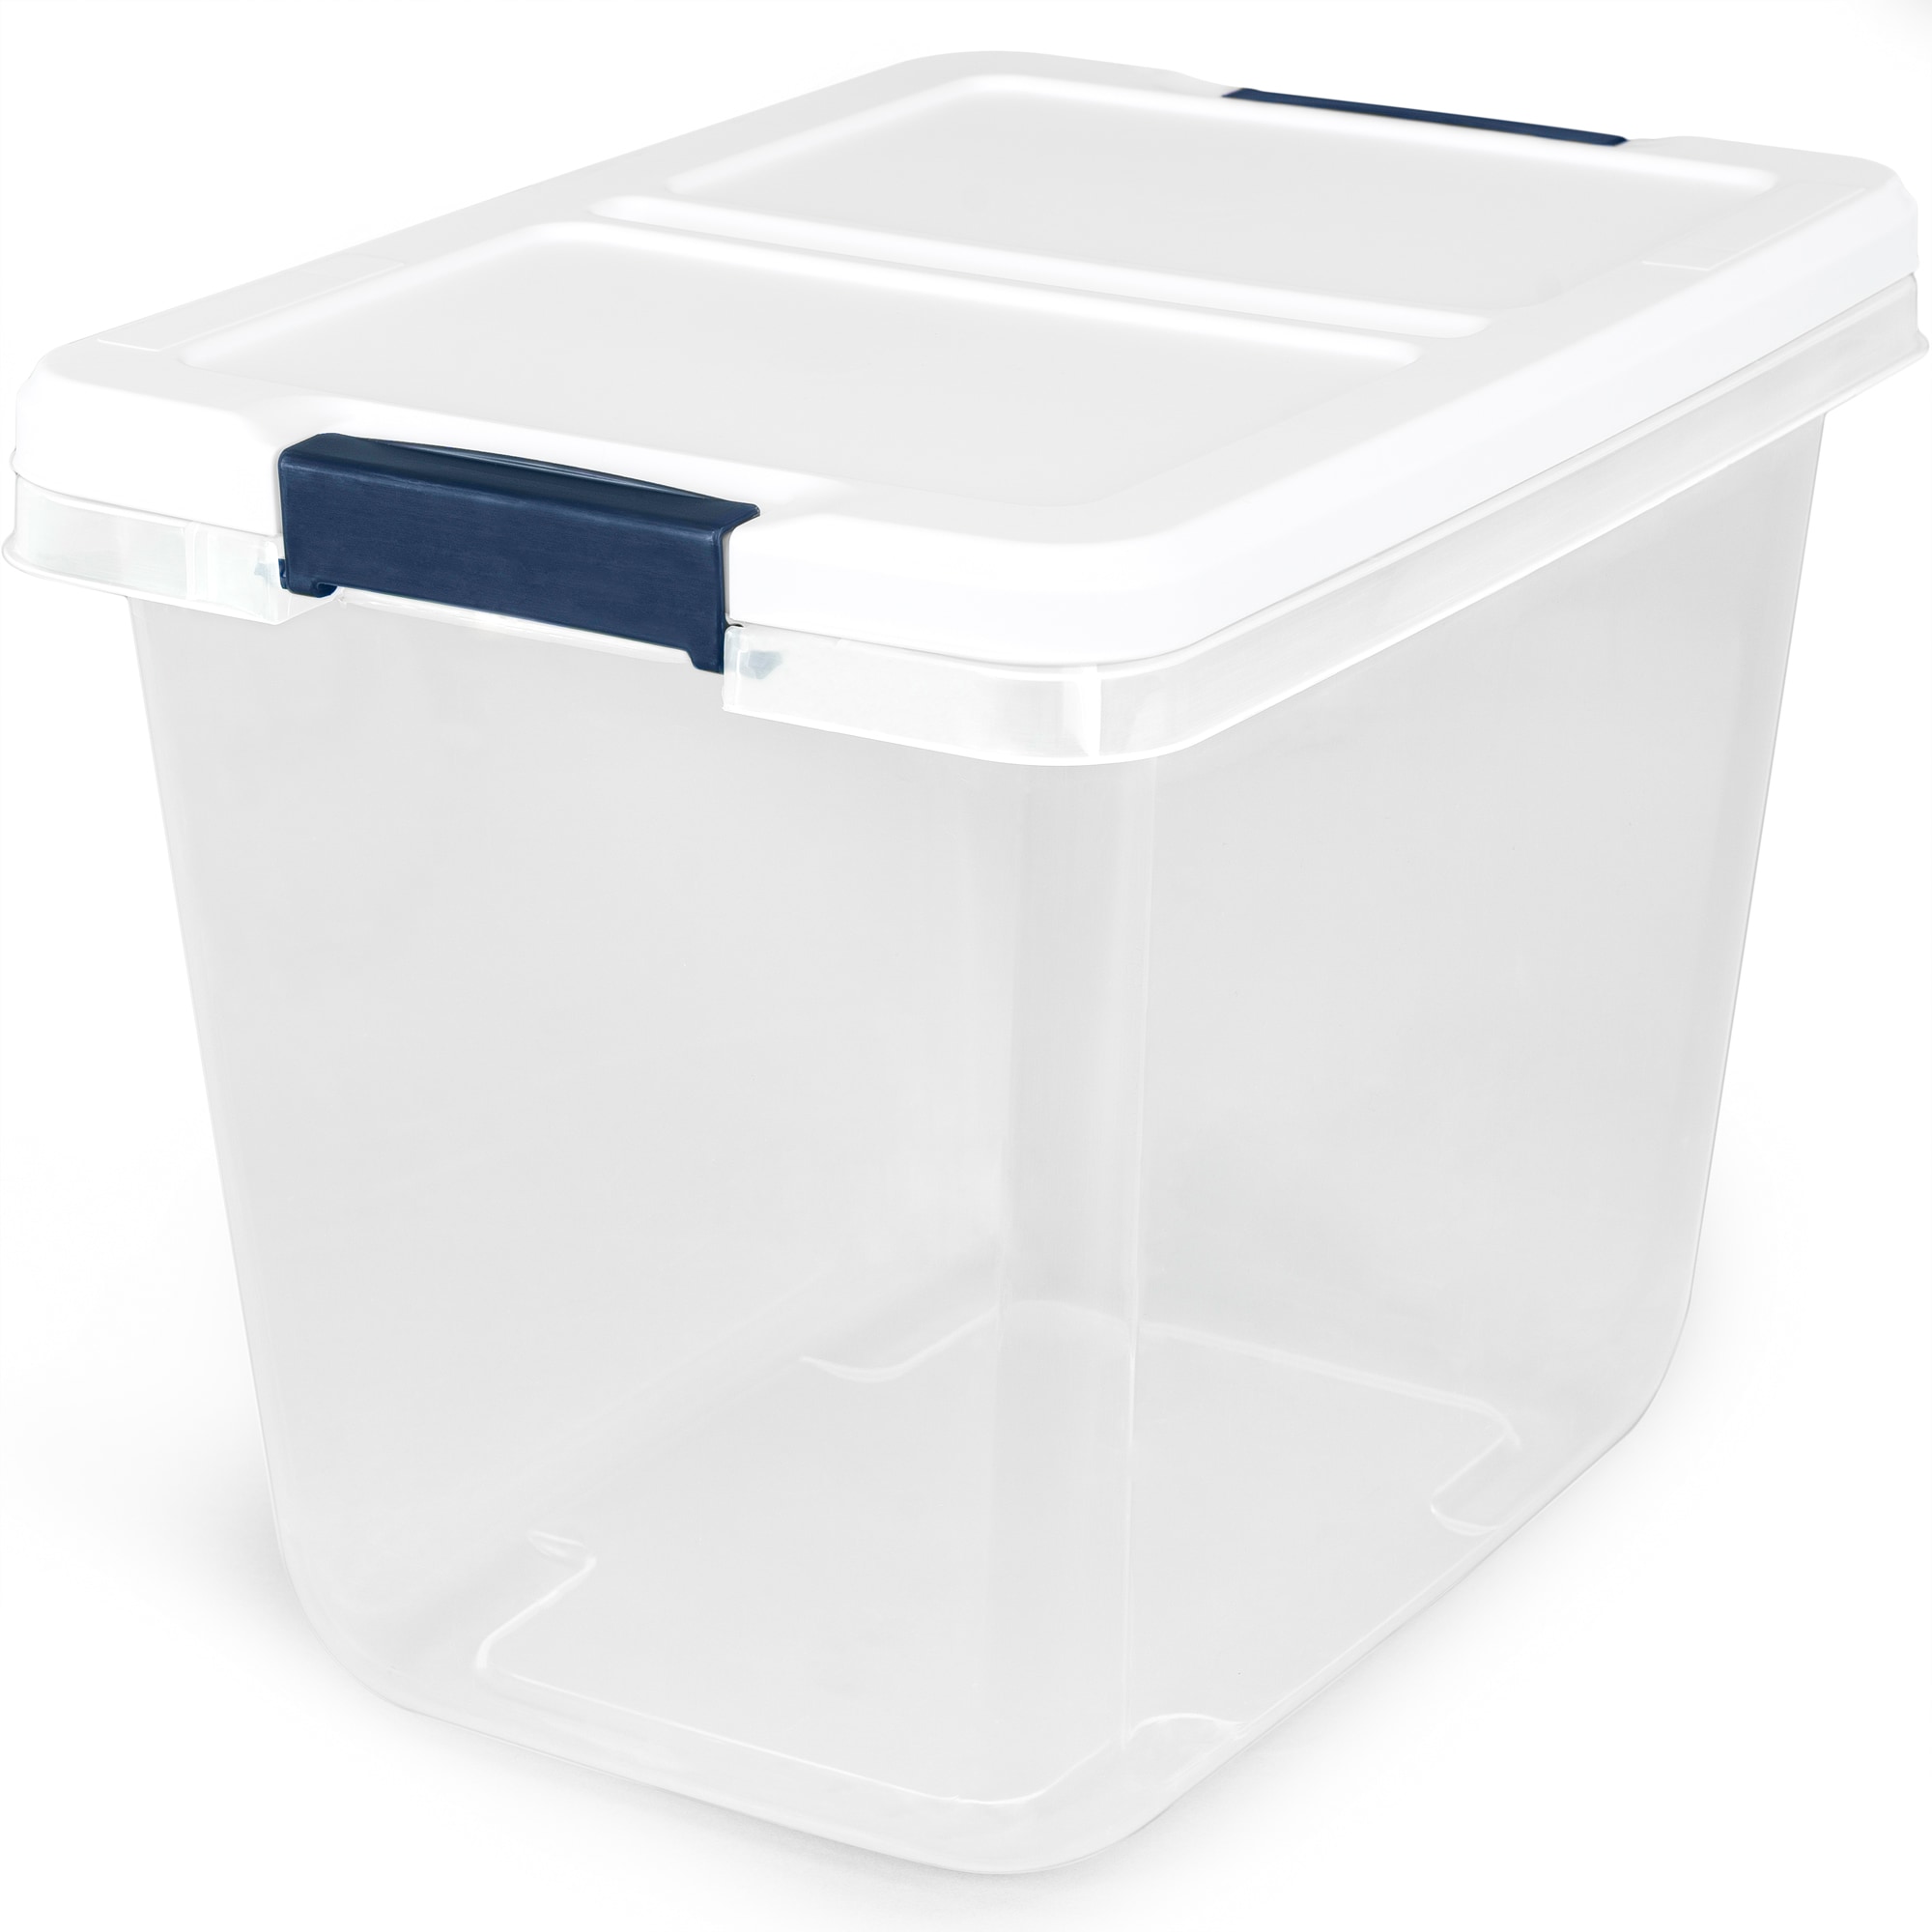 Clear plastic totes, clear storage totes wholesale - plastic